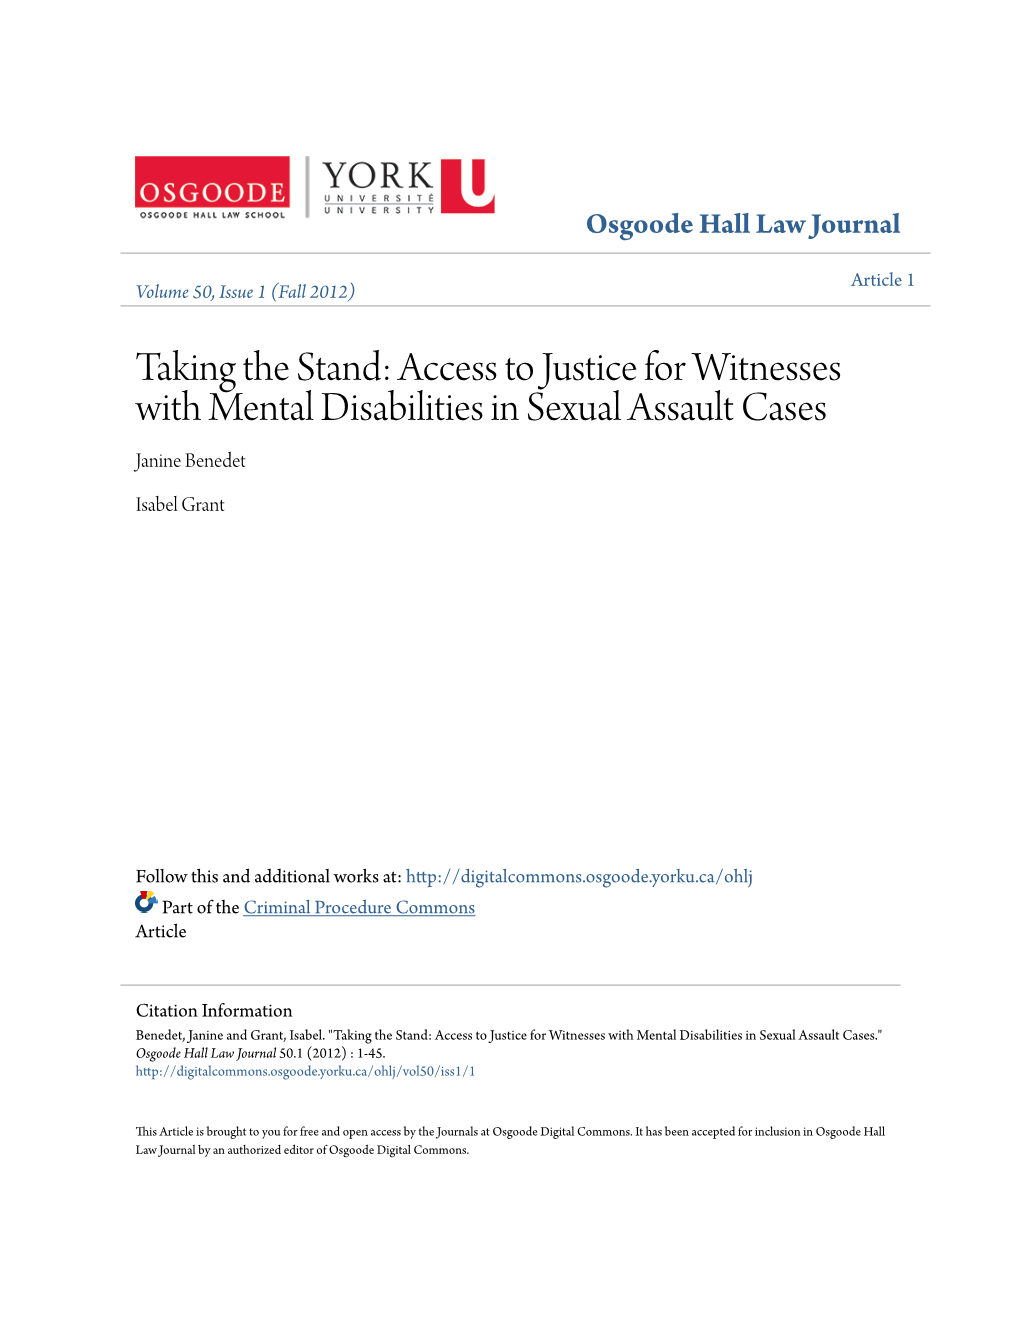 Access to Justice for Witnesses with Mental Disabilities in Sexual Assault Cases Janine Benedet